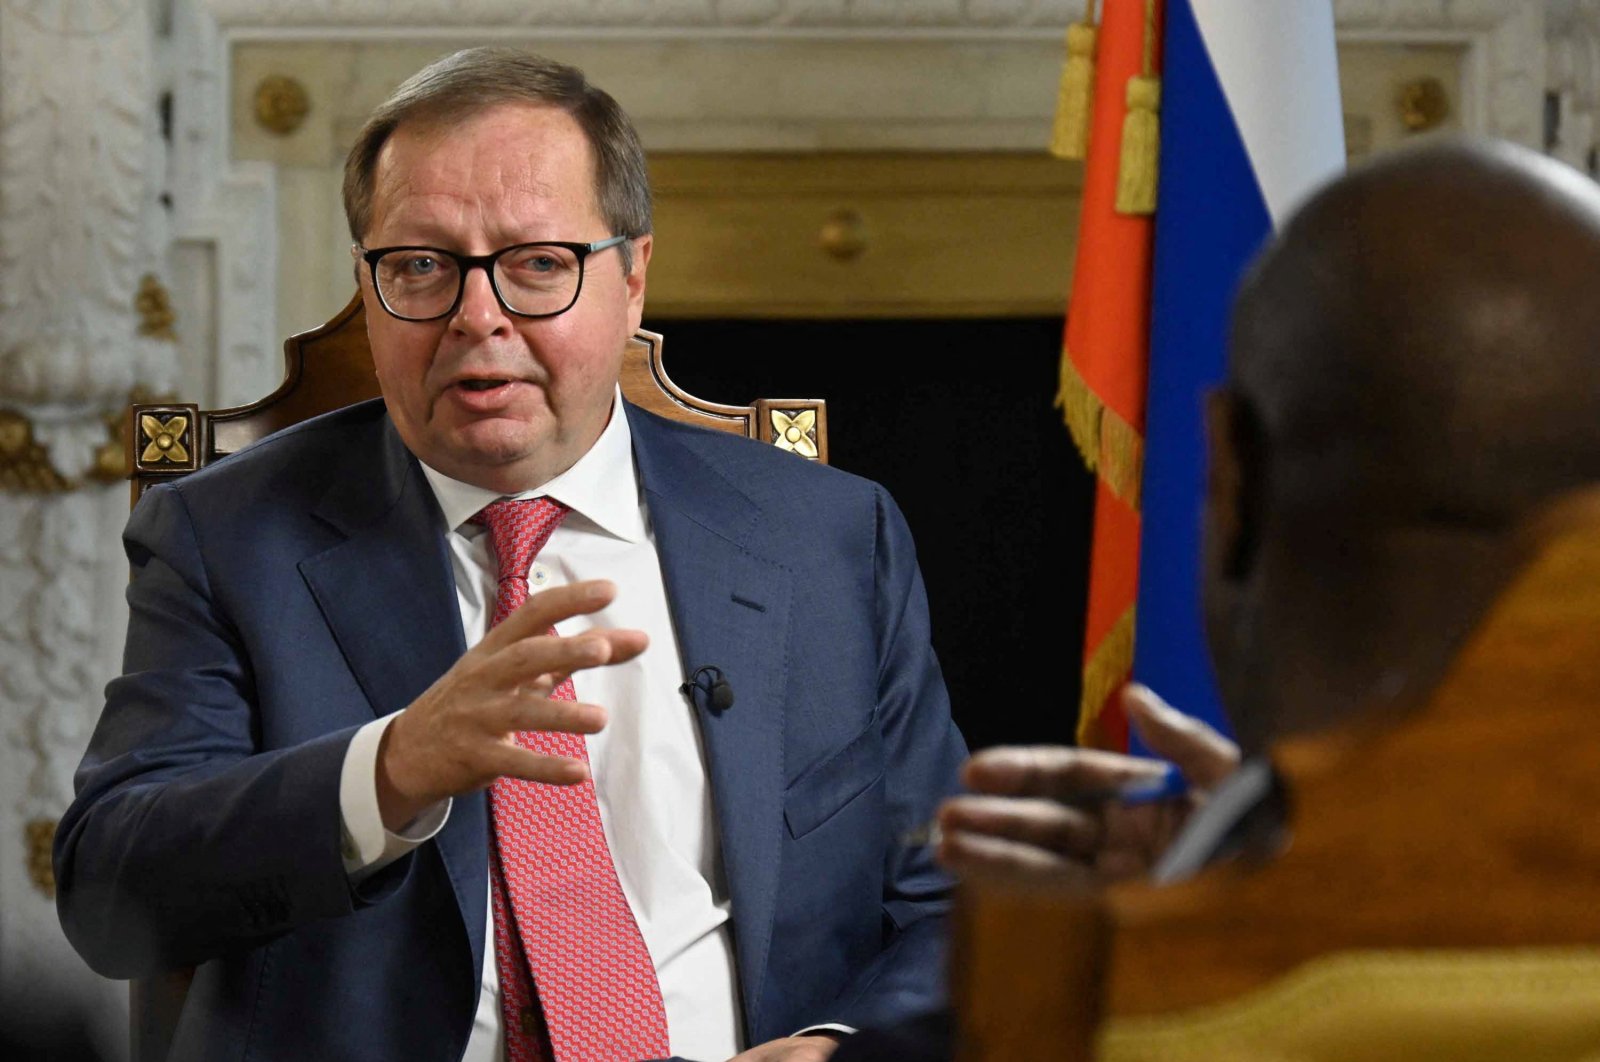 Andrei Kelin, ambassador of the Russian Federation to the U.K., appears on BBC&#039;s Sunday Morning presented by Clive Myrie in London, Britain, May 29, 2022. (Reuters Photo)